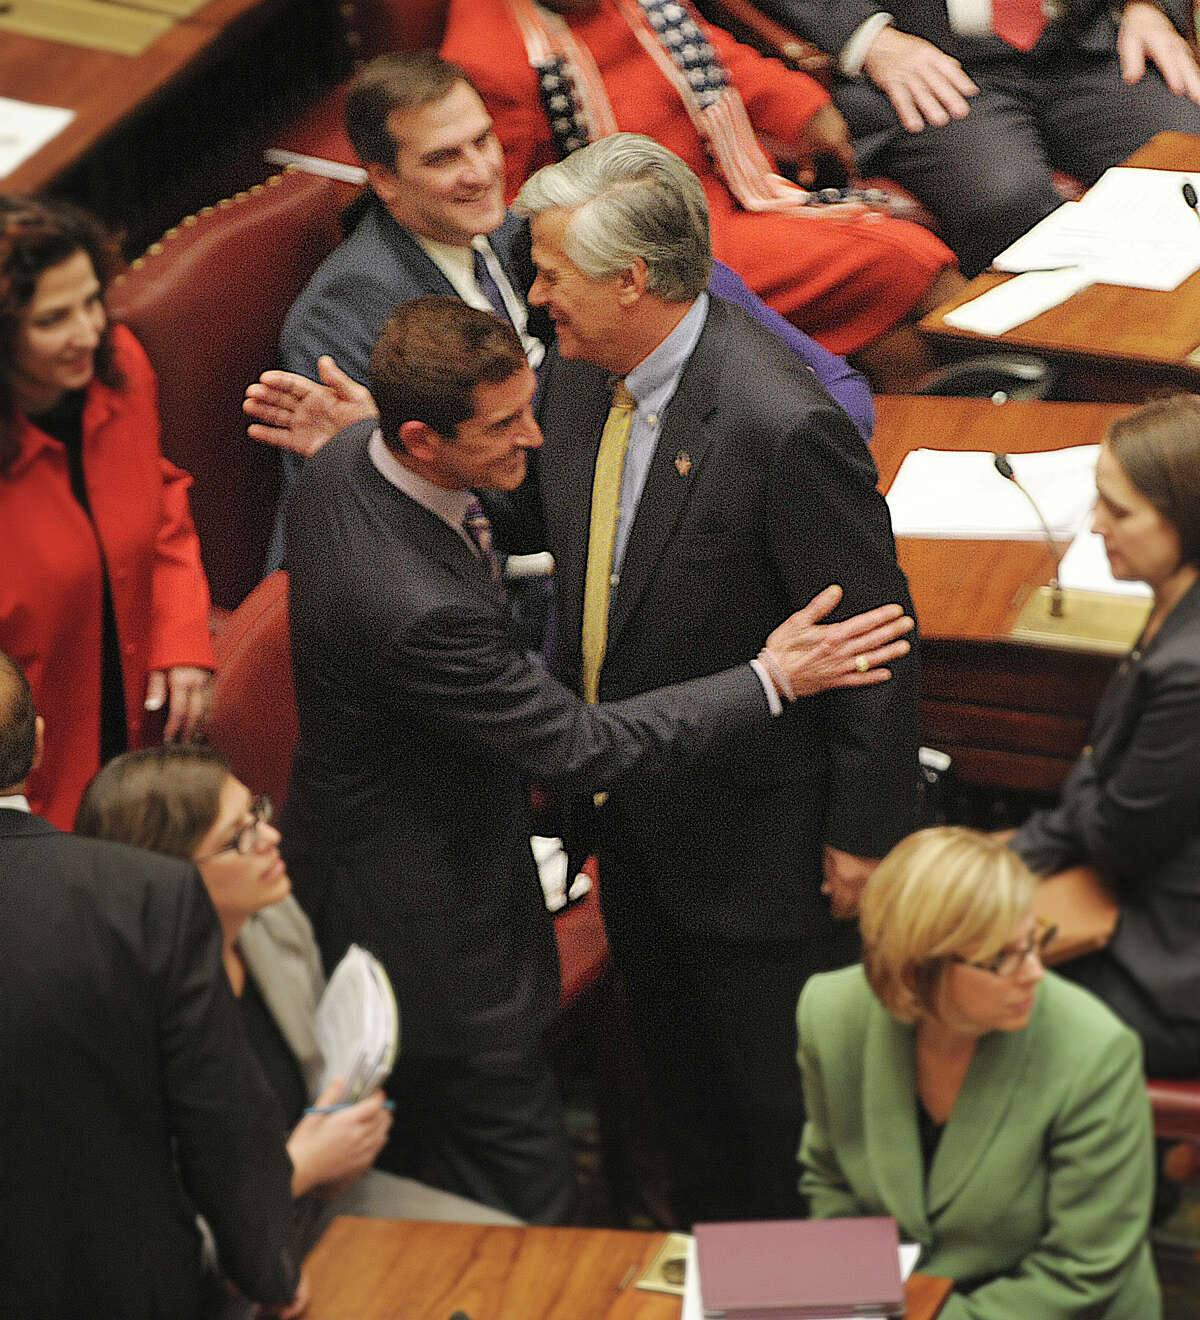 Newly elected co-leaders of the Senate, Senator Jeffrey Klein, left, and Senator Dean Skelos give each other a pat on the shoulder as they pass on the floor of the Senate on Wednesday, Jan. 9, 2013 in Albany, NY. (Paul Buckowski / Times Union)